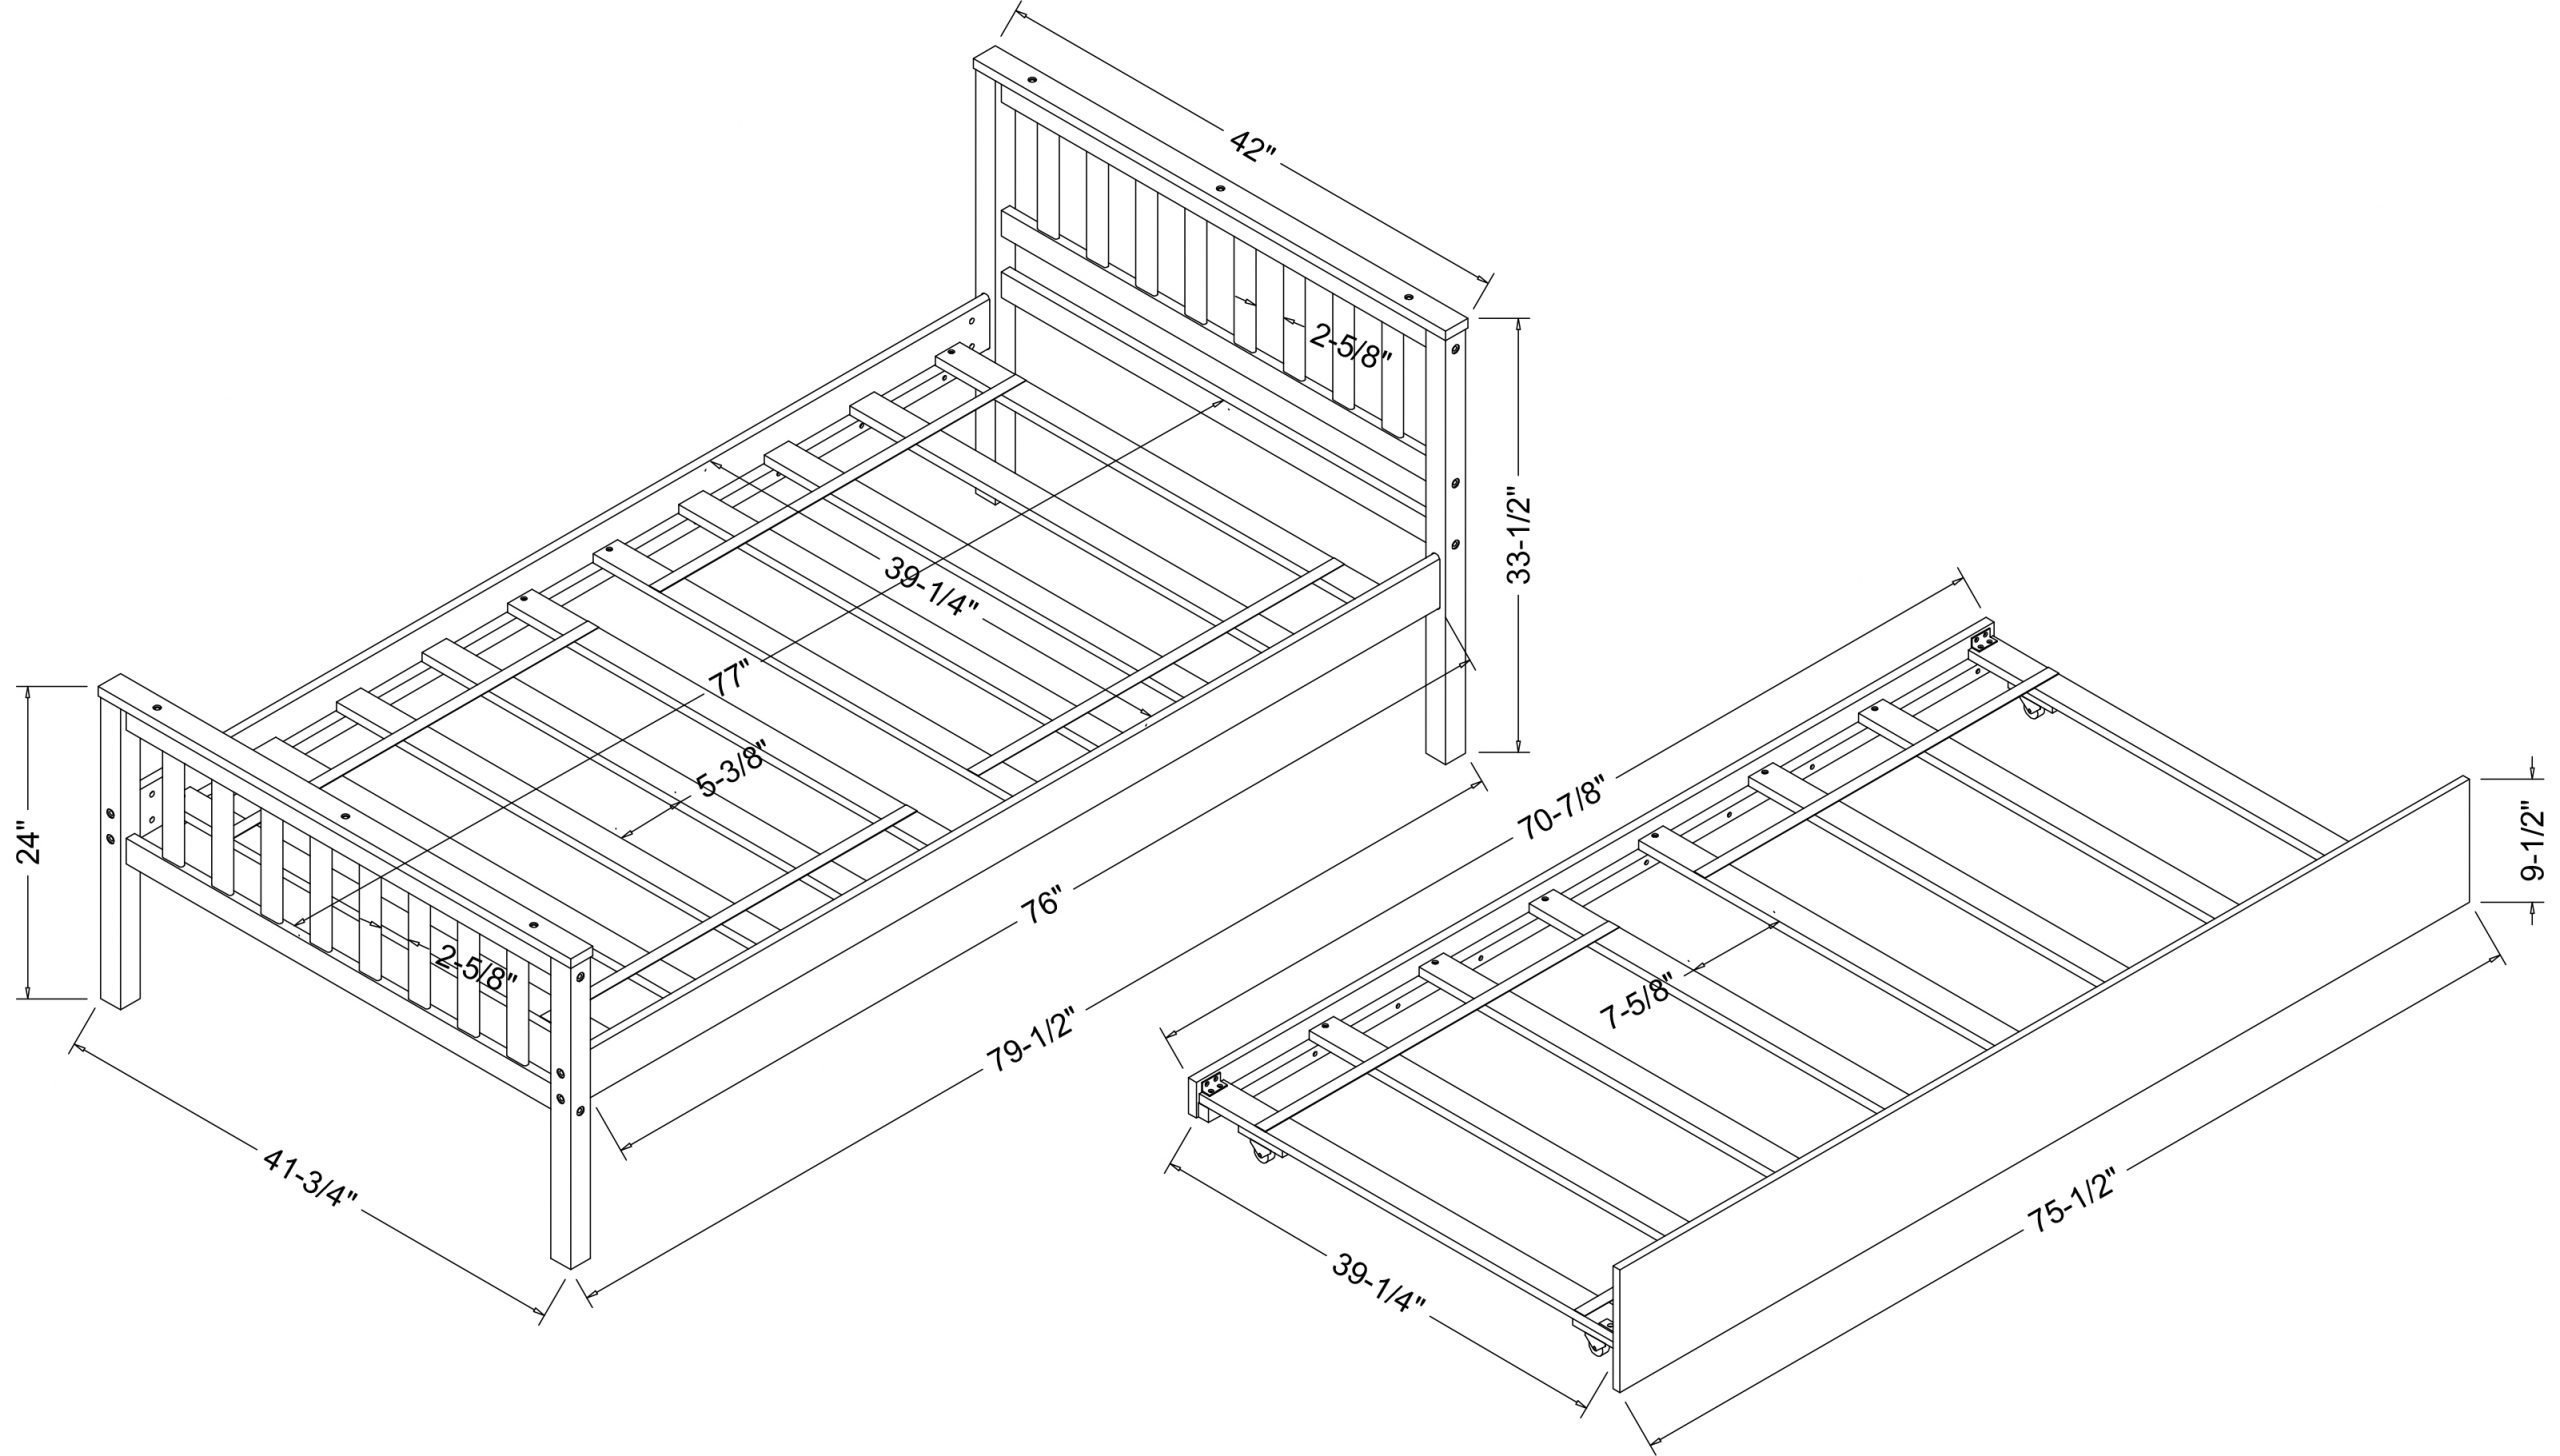 Twin Platform Bed With Trundle